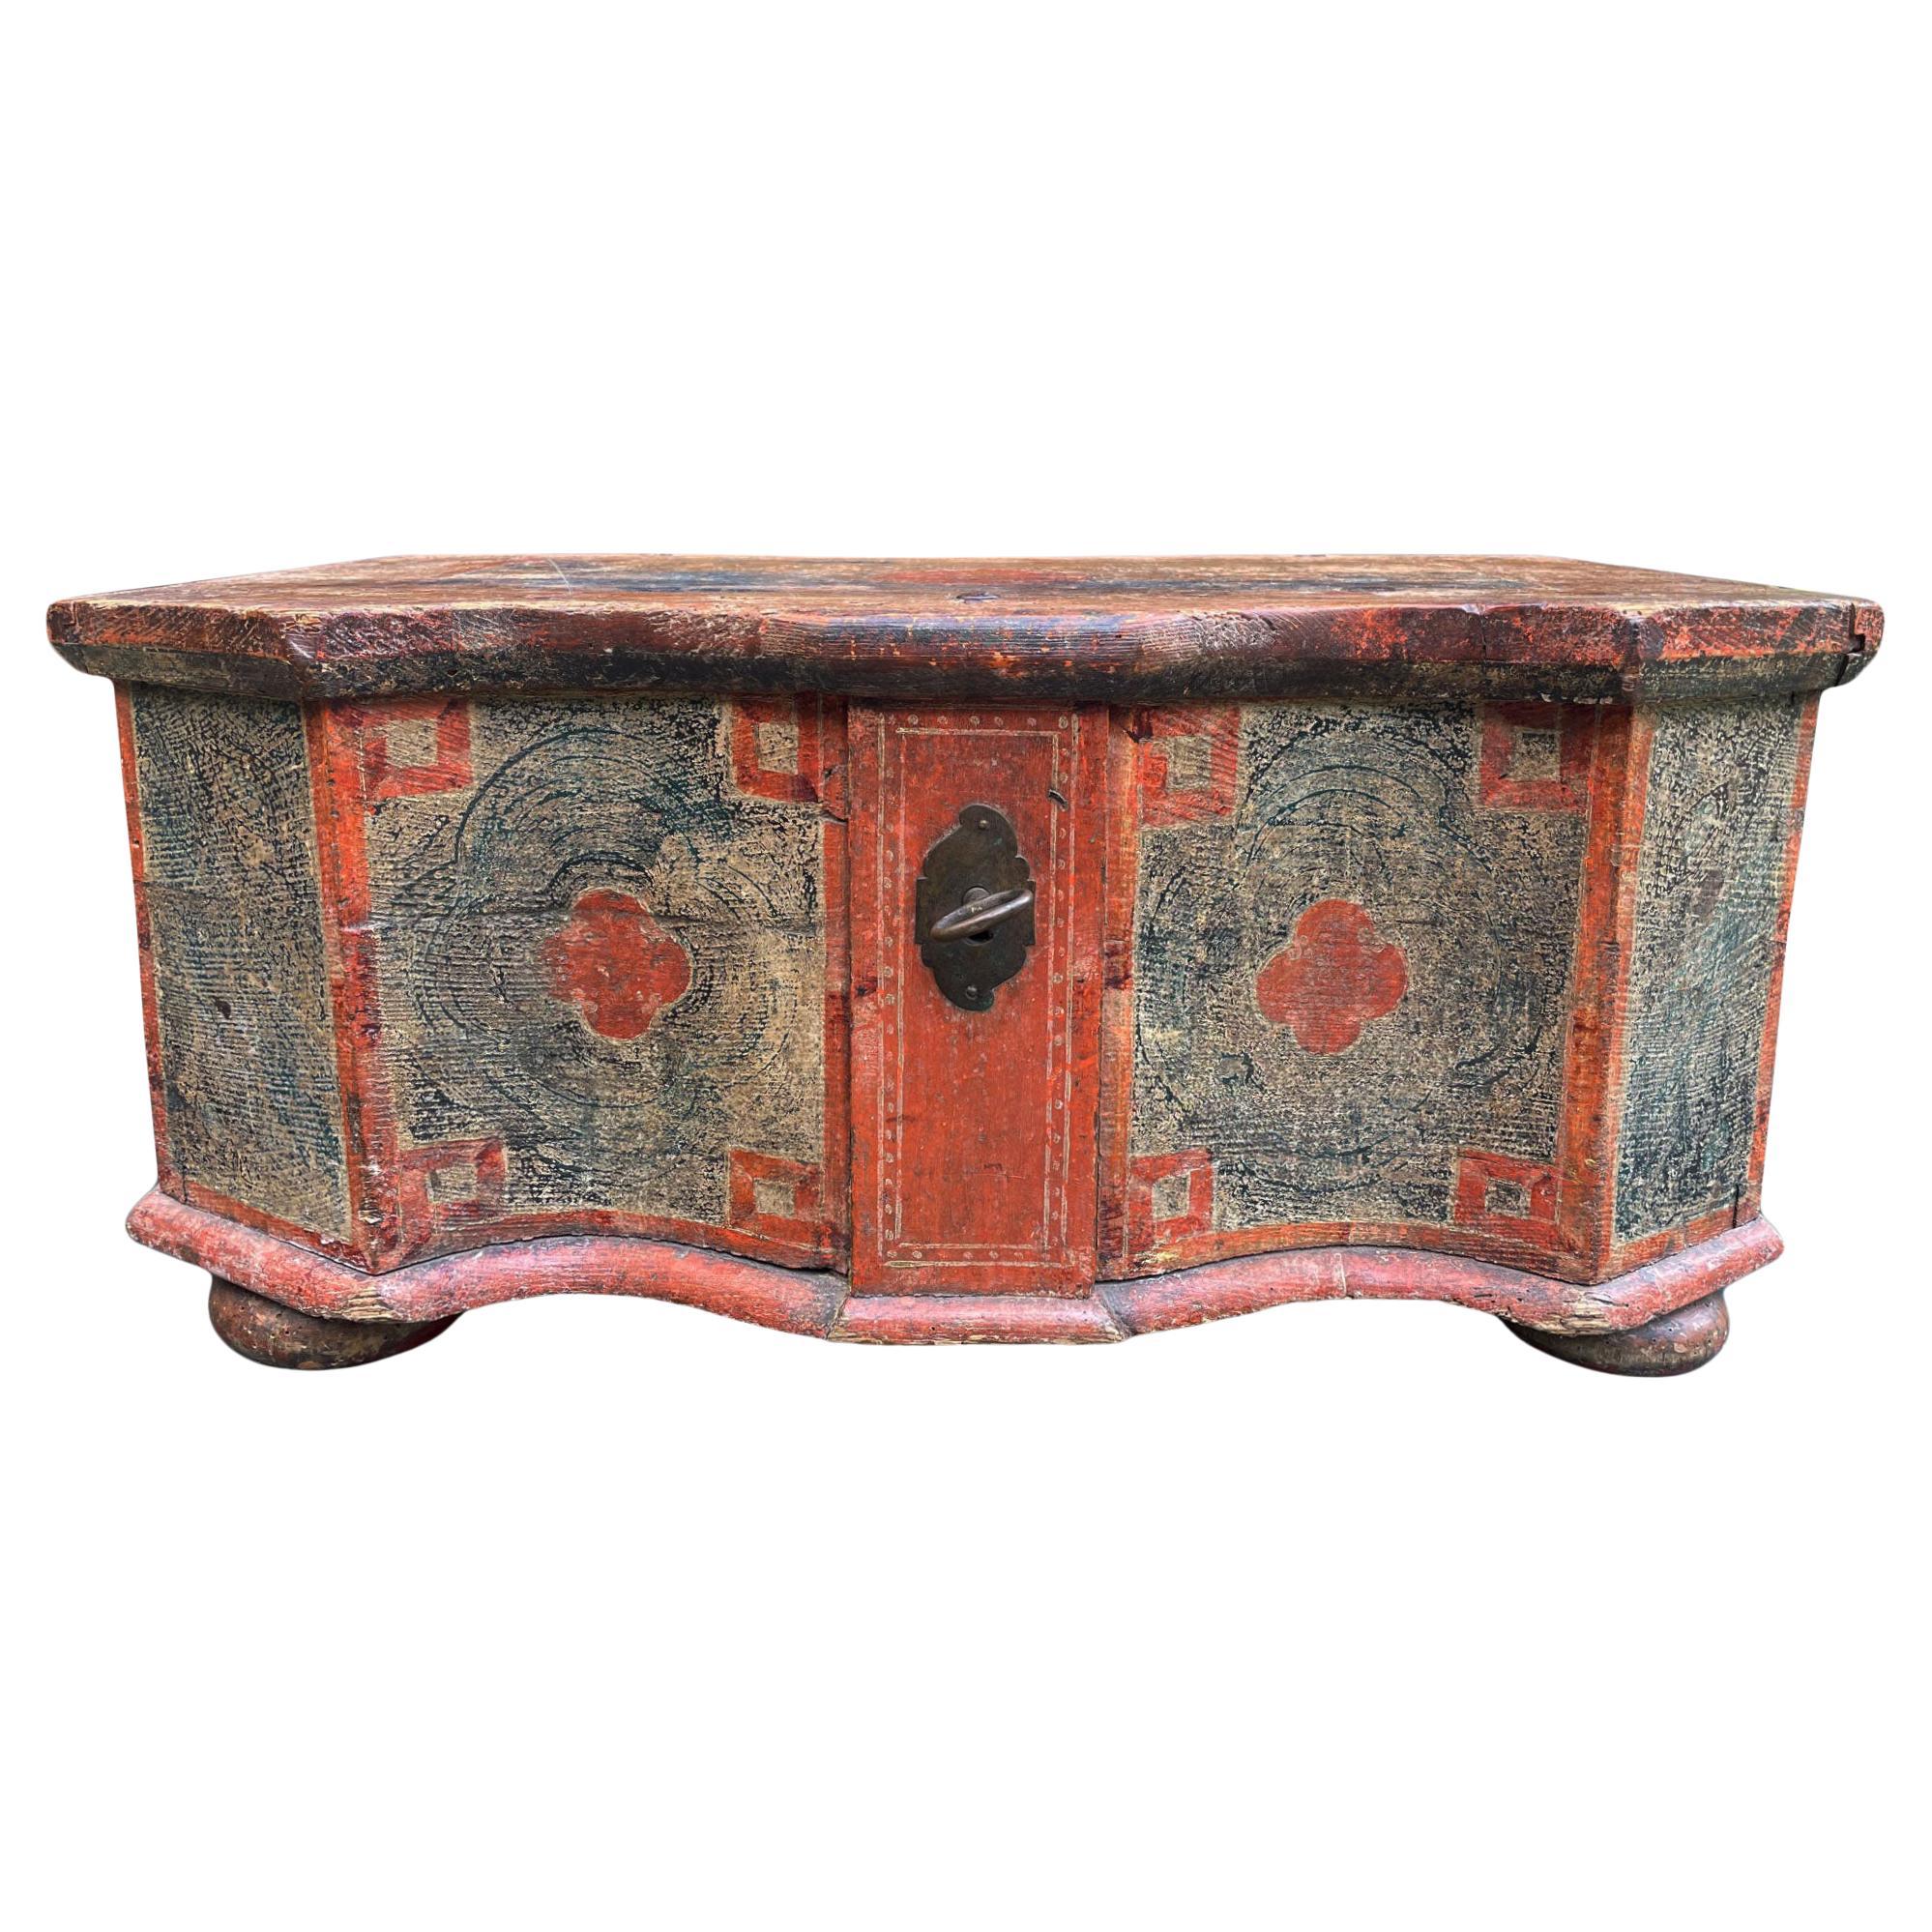 Exceptional 1750 Red and Blu Painted Blanket Chest, Central Europe